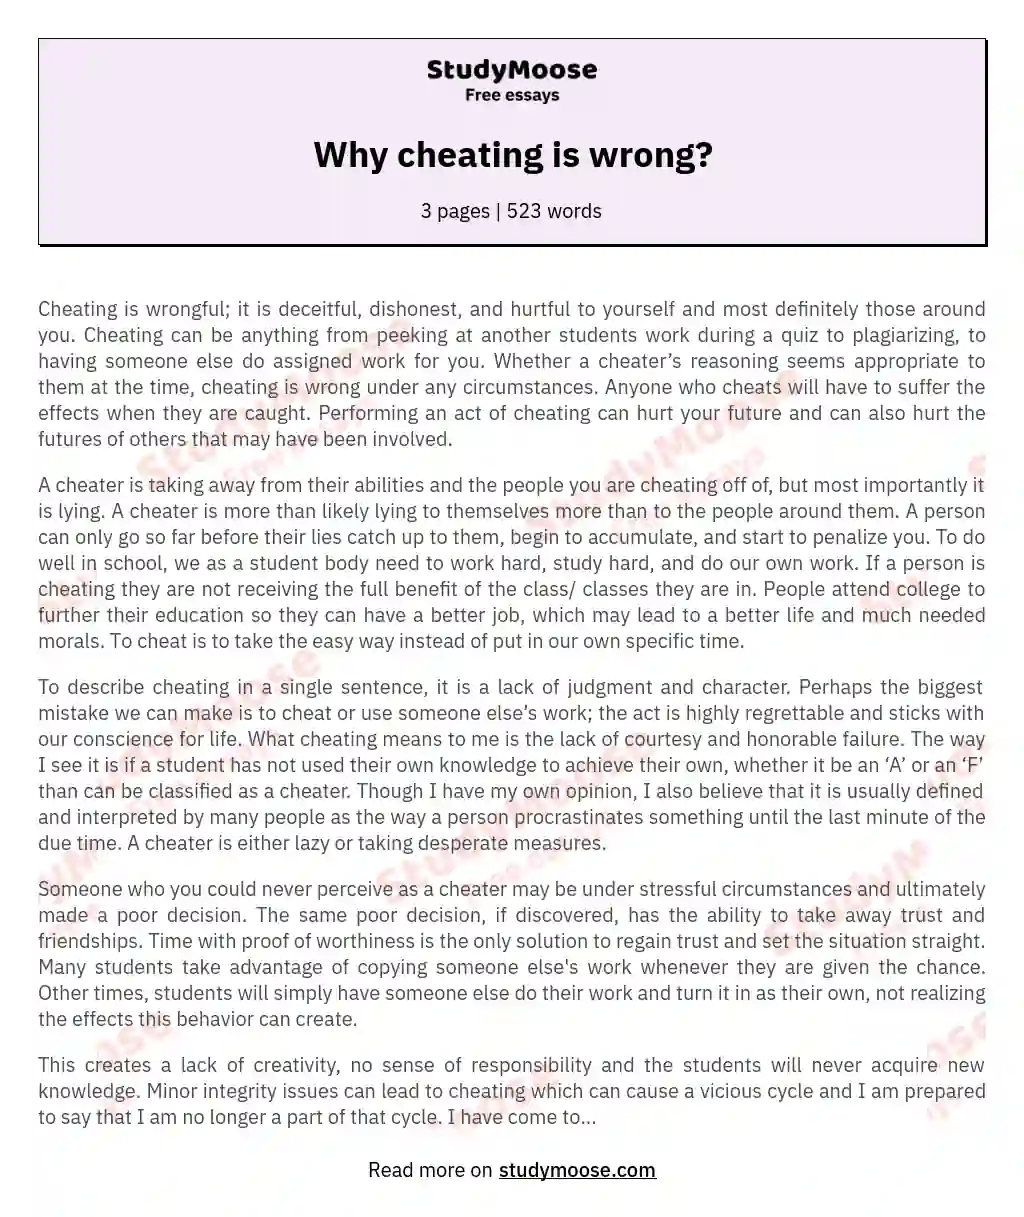 Why cheating is wrong? essay